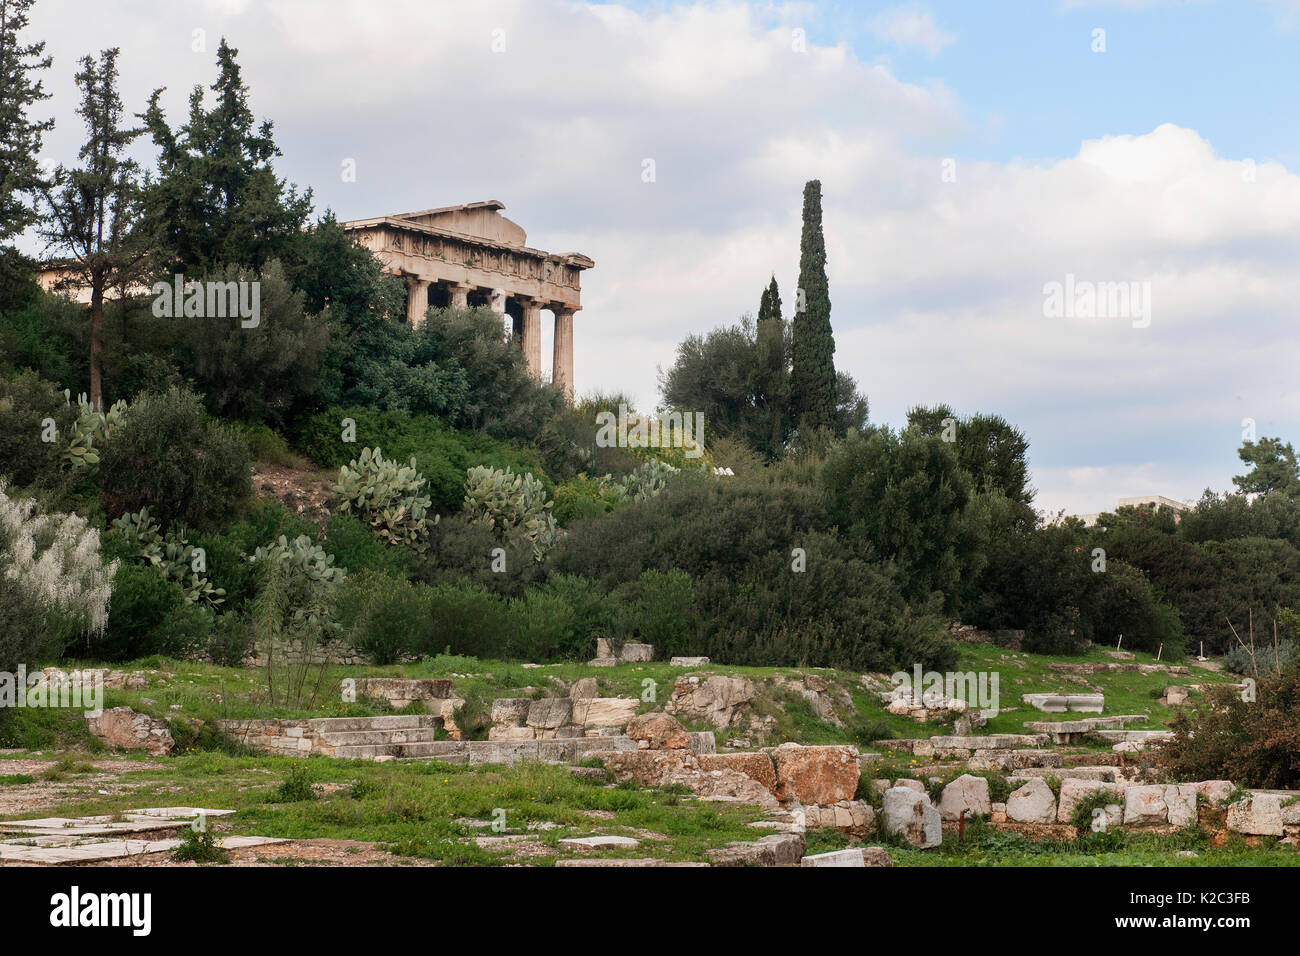 The Temple of Hephaestus surrounded by Cypress trees (Cupressus sempervirens), Olive trees (Olea europaea) and Prickly pears (Opuntia ficus-indica ). Attica region, Athens, Greece,  January 2011. Stock Photo